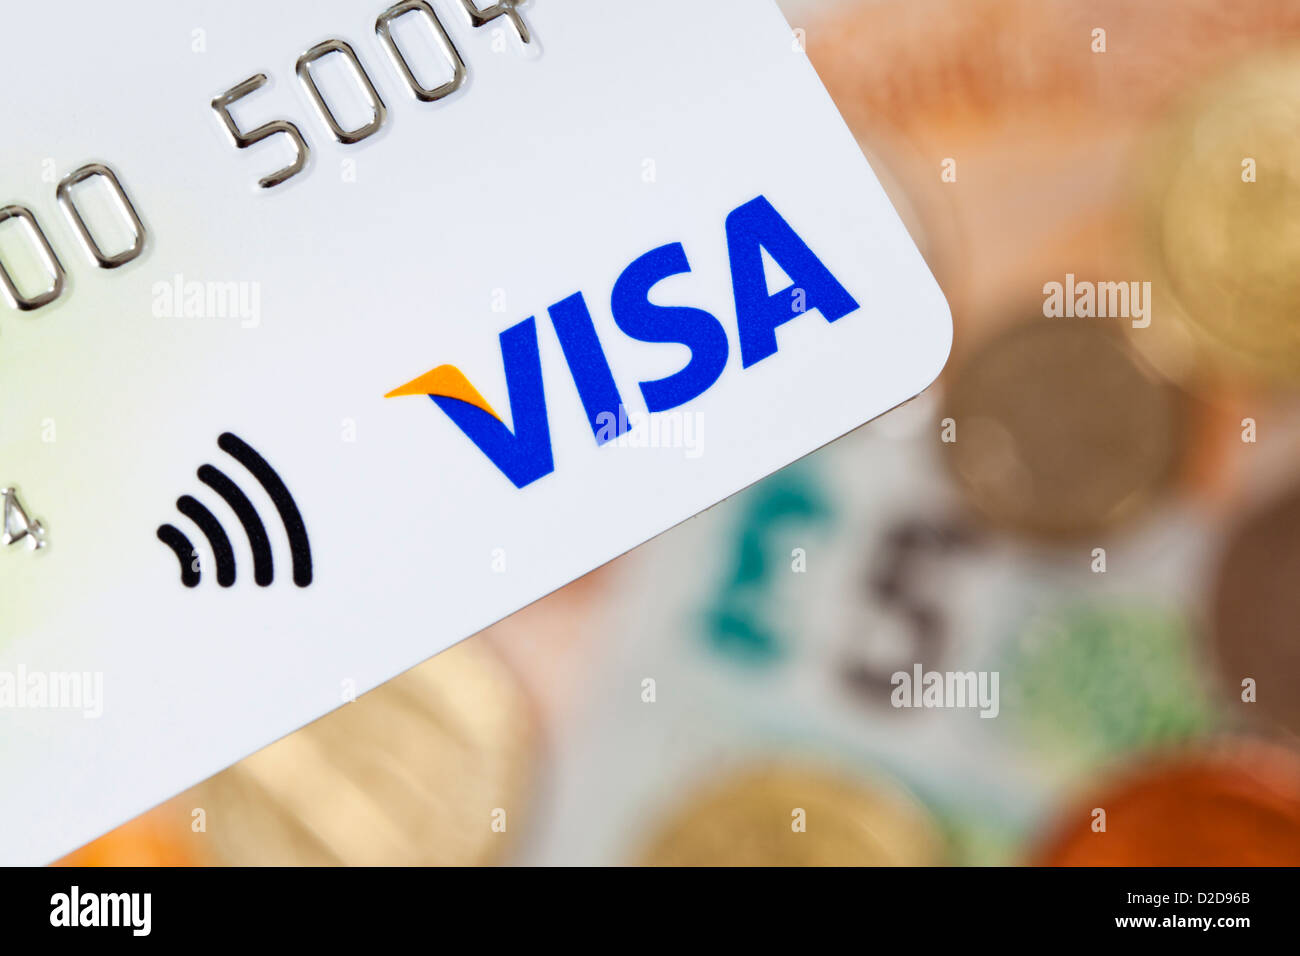 Bath, United Kingdom - November 8, 2011: Close-up of a contactless Visa credit card with UK currency in the background Stock Photo